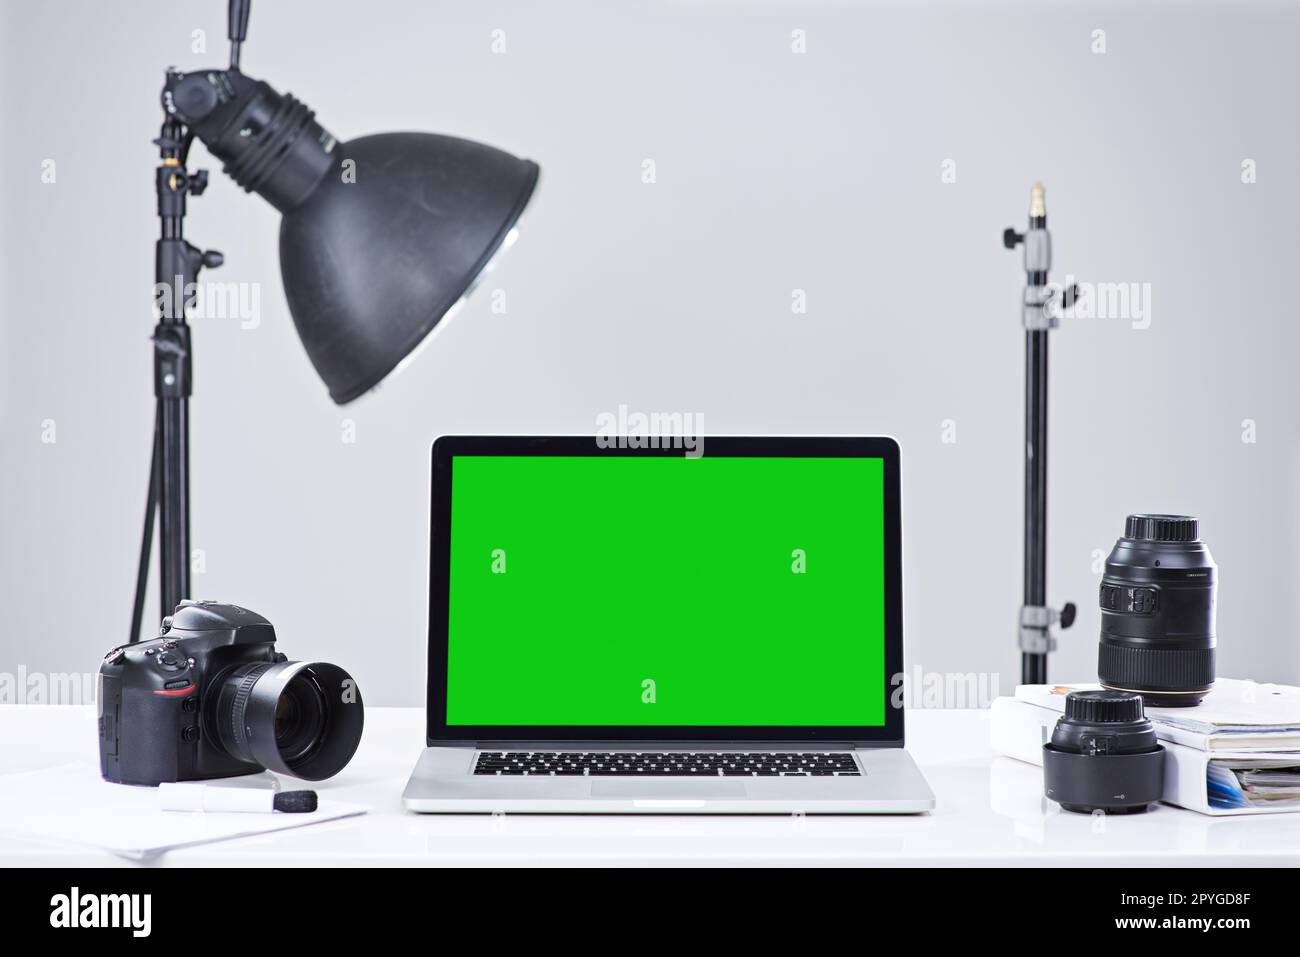 Turn your hobby into a business. a laptop with a green screen surrounded by photography equipment. Stock Photo